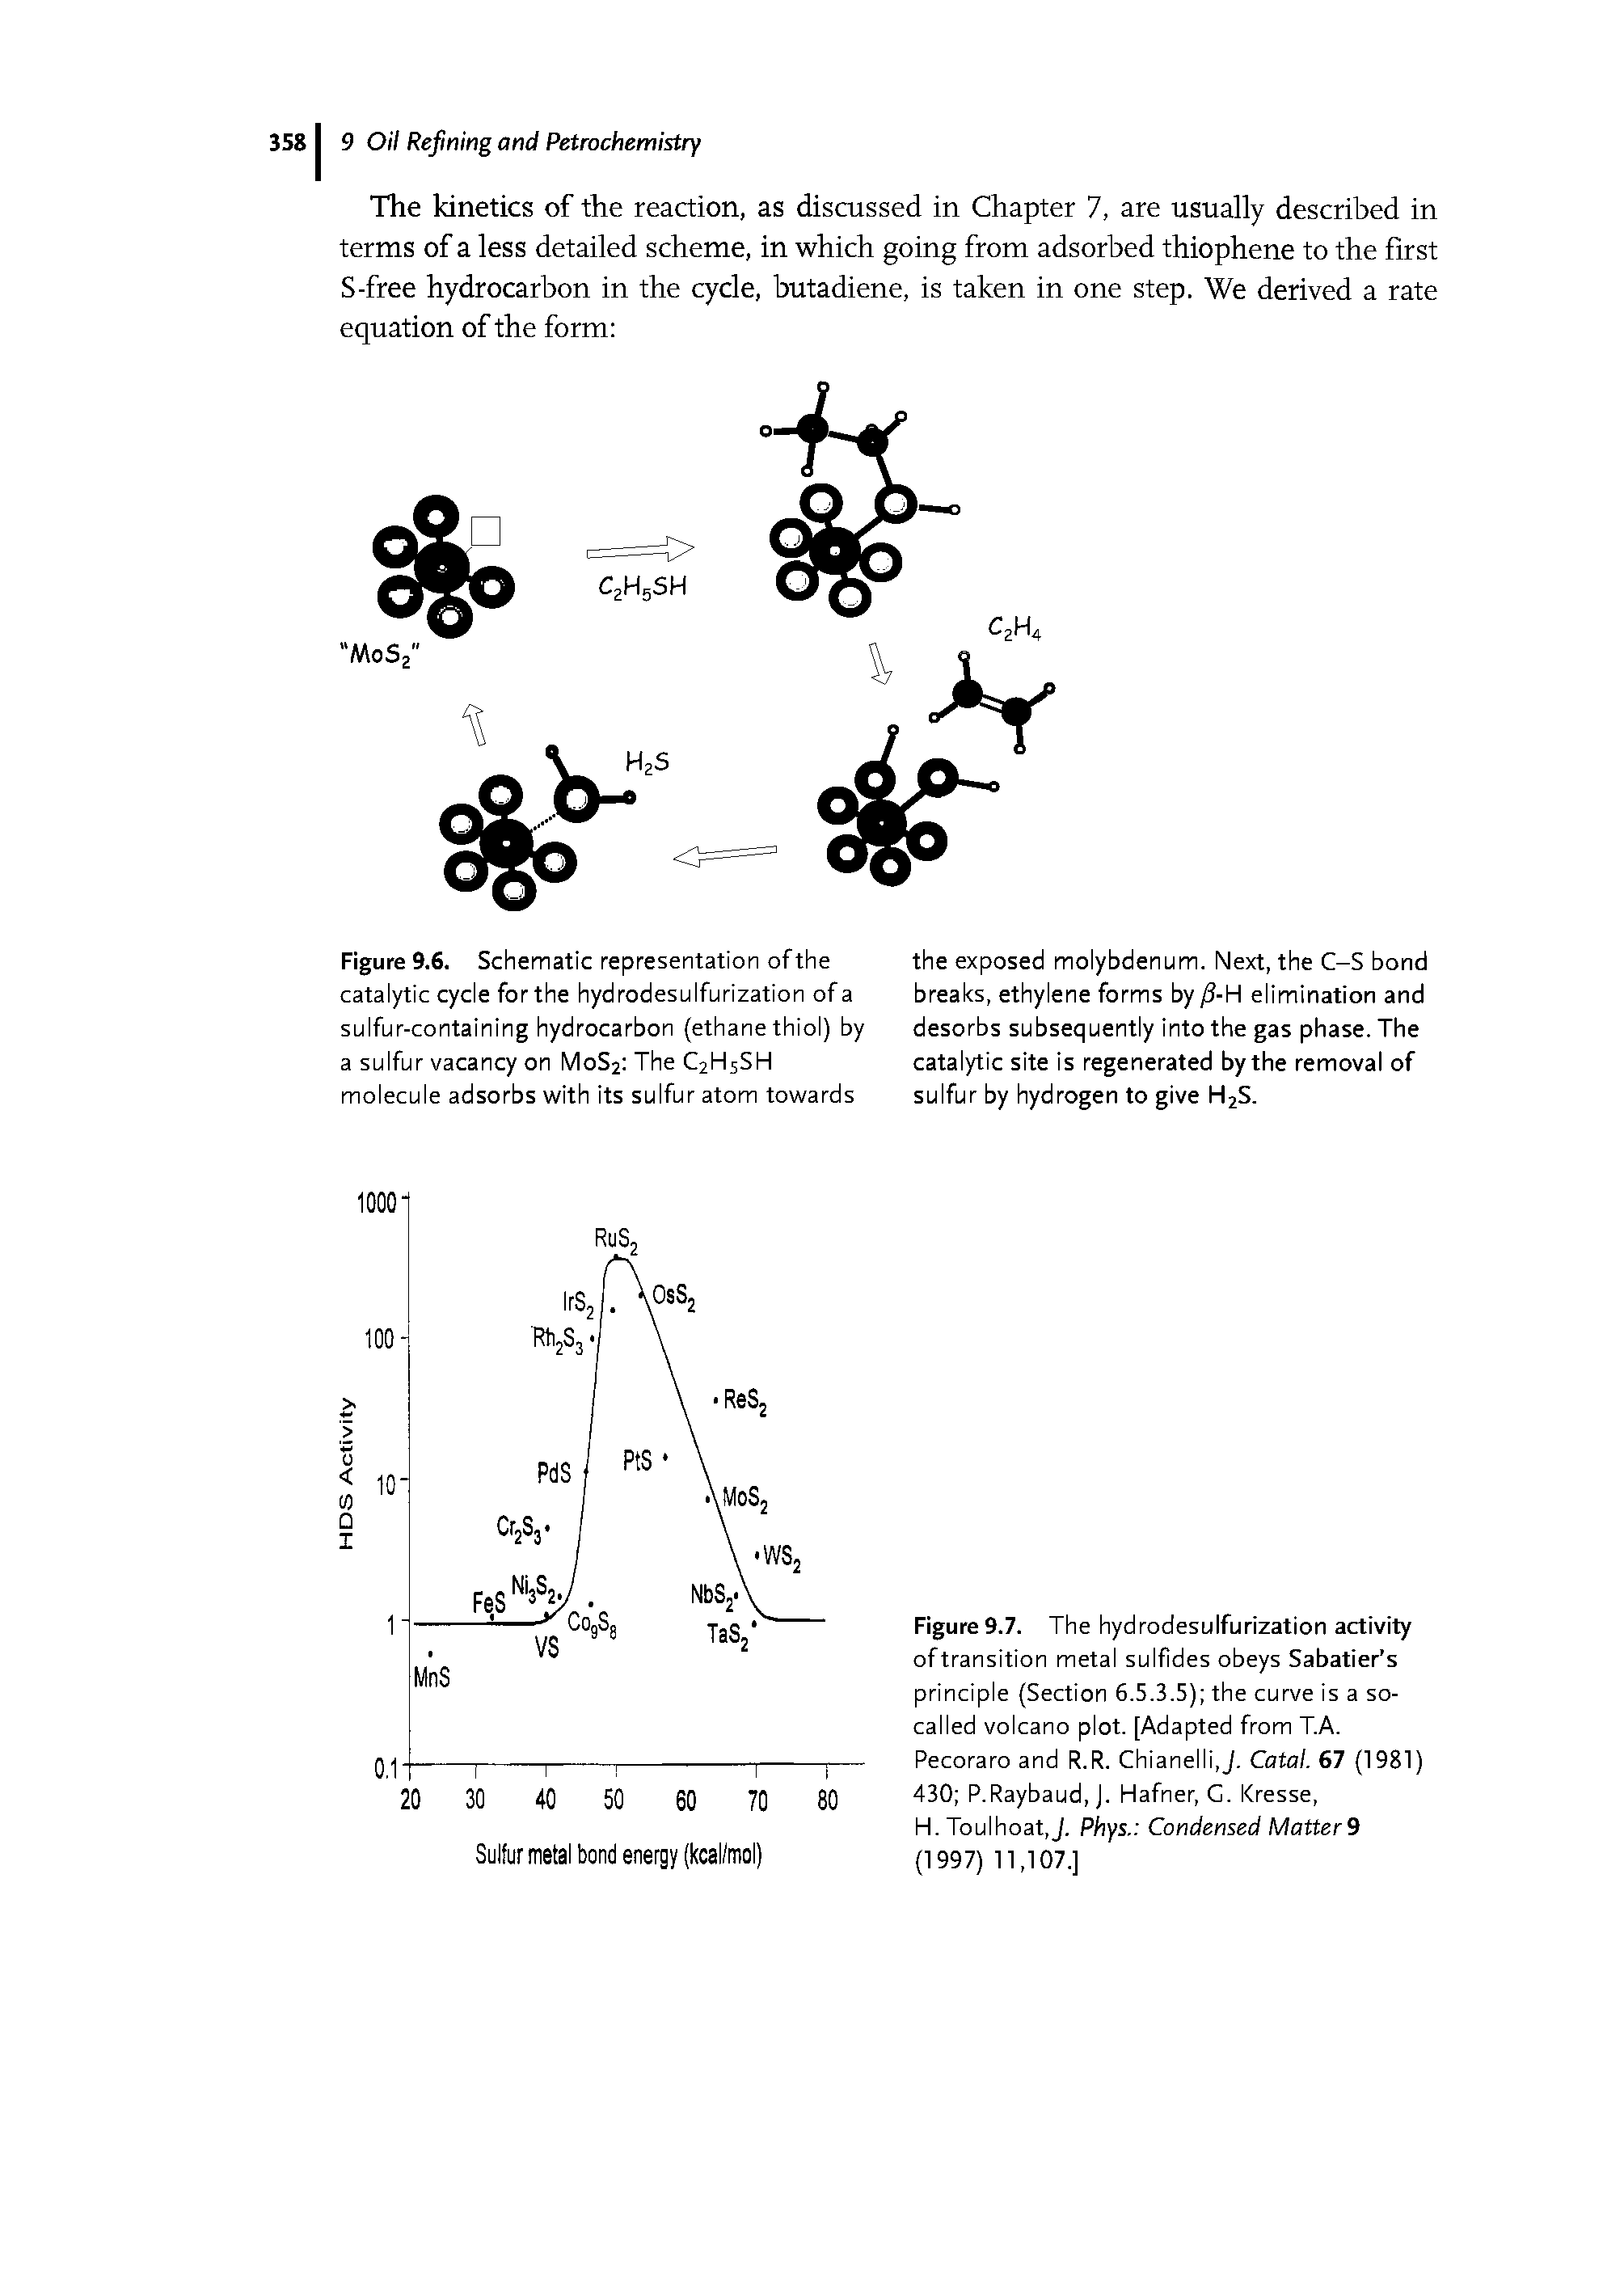 Figure 9.7. The hydrodesulfurization activity oftransition metal sulfides obeys Sabatier s principle (Section 6.5.3.5) the curve is a so-called volcano plot. [Adapted from T.A. Pecoraro and R.R. Chianelli.J, Catal. 67 (1981) 430 P.Raybaud,). Hafner, G. Kresse,...